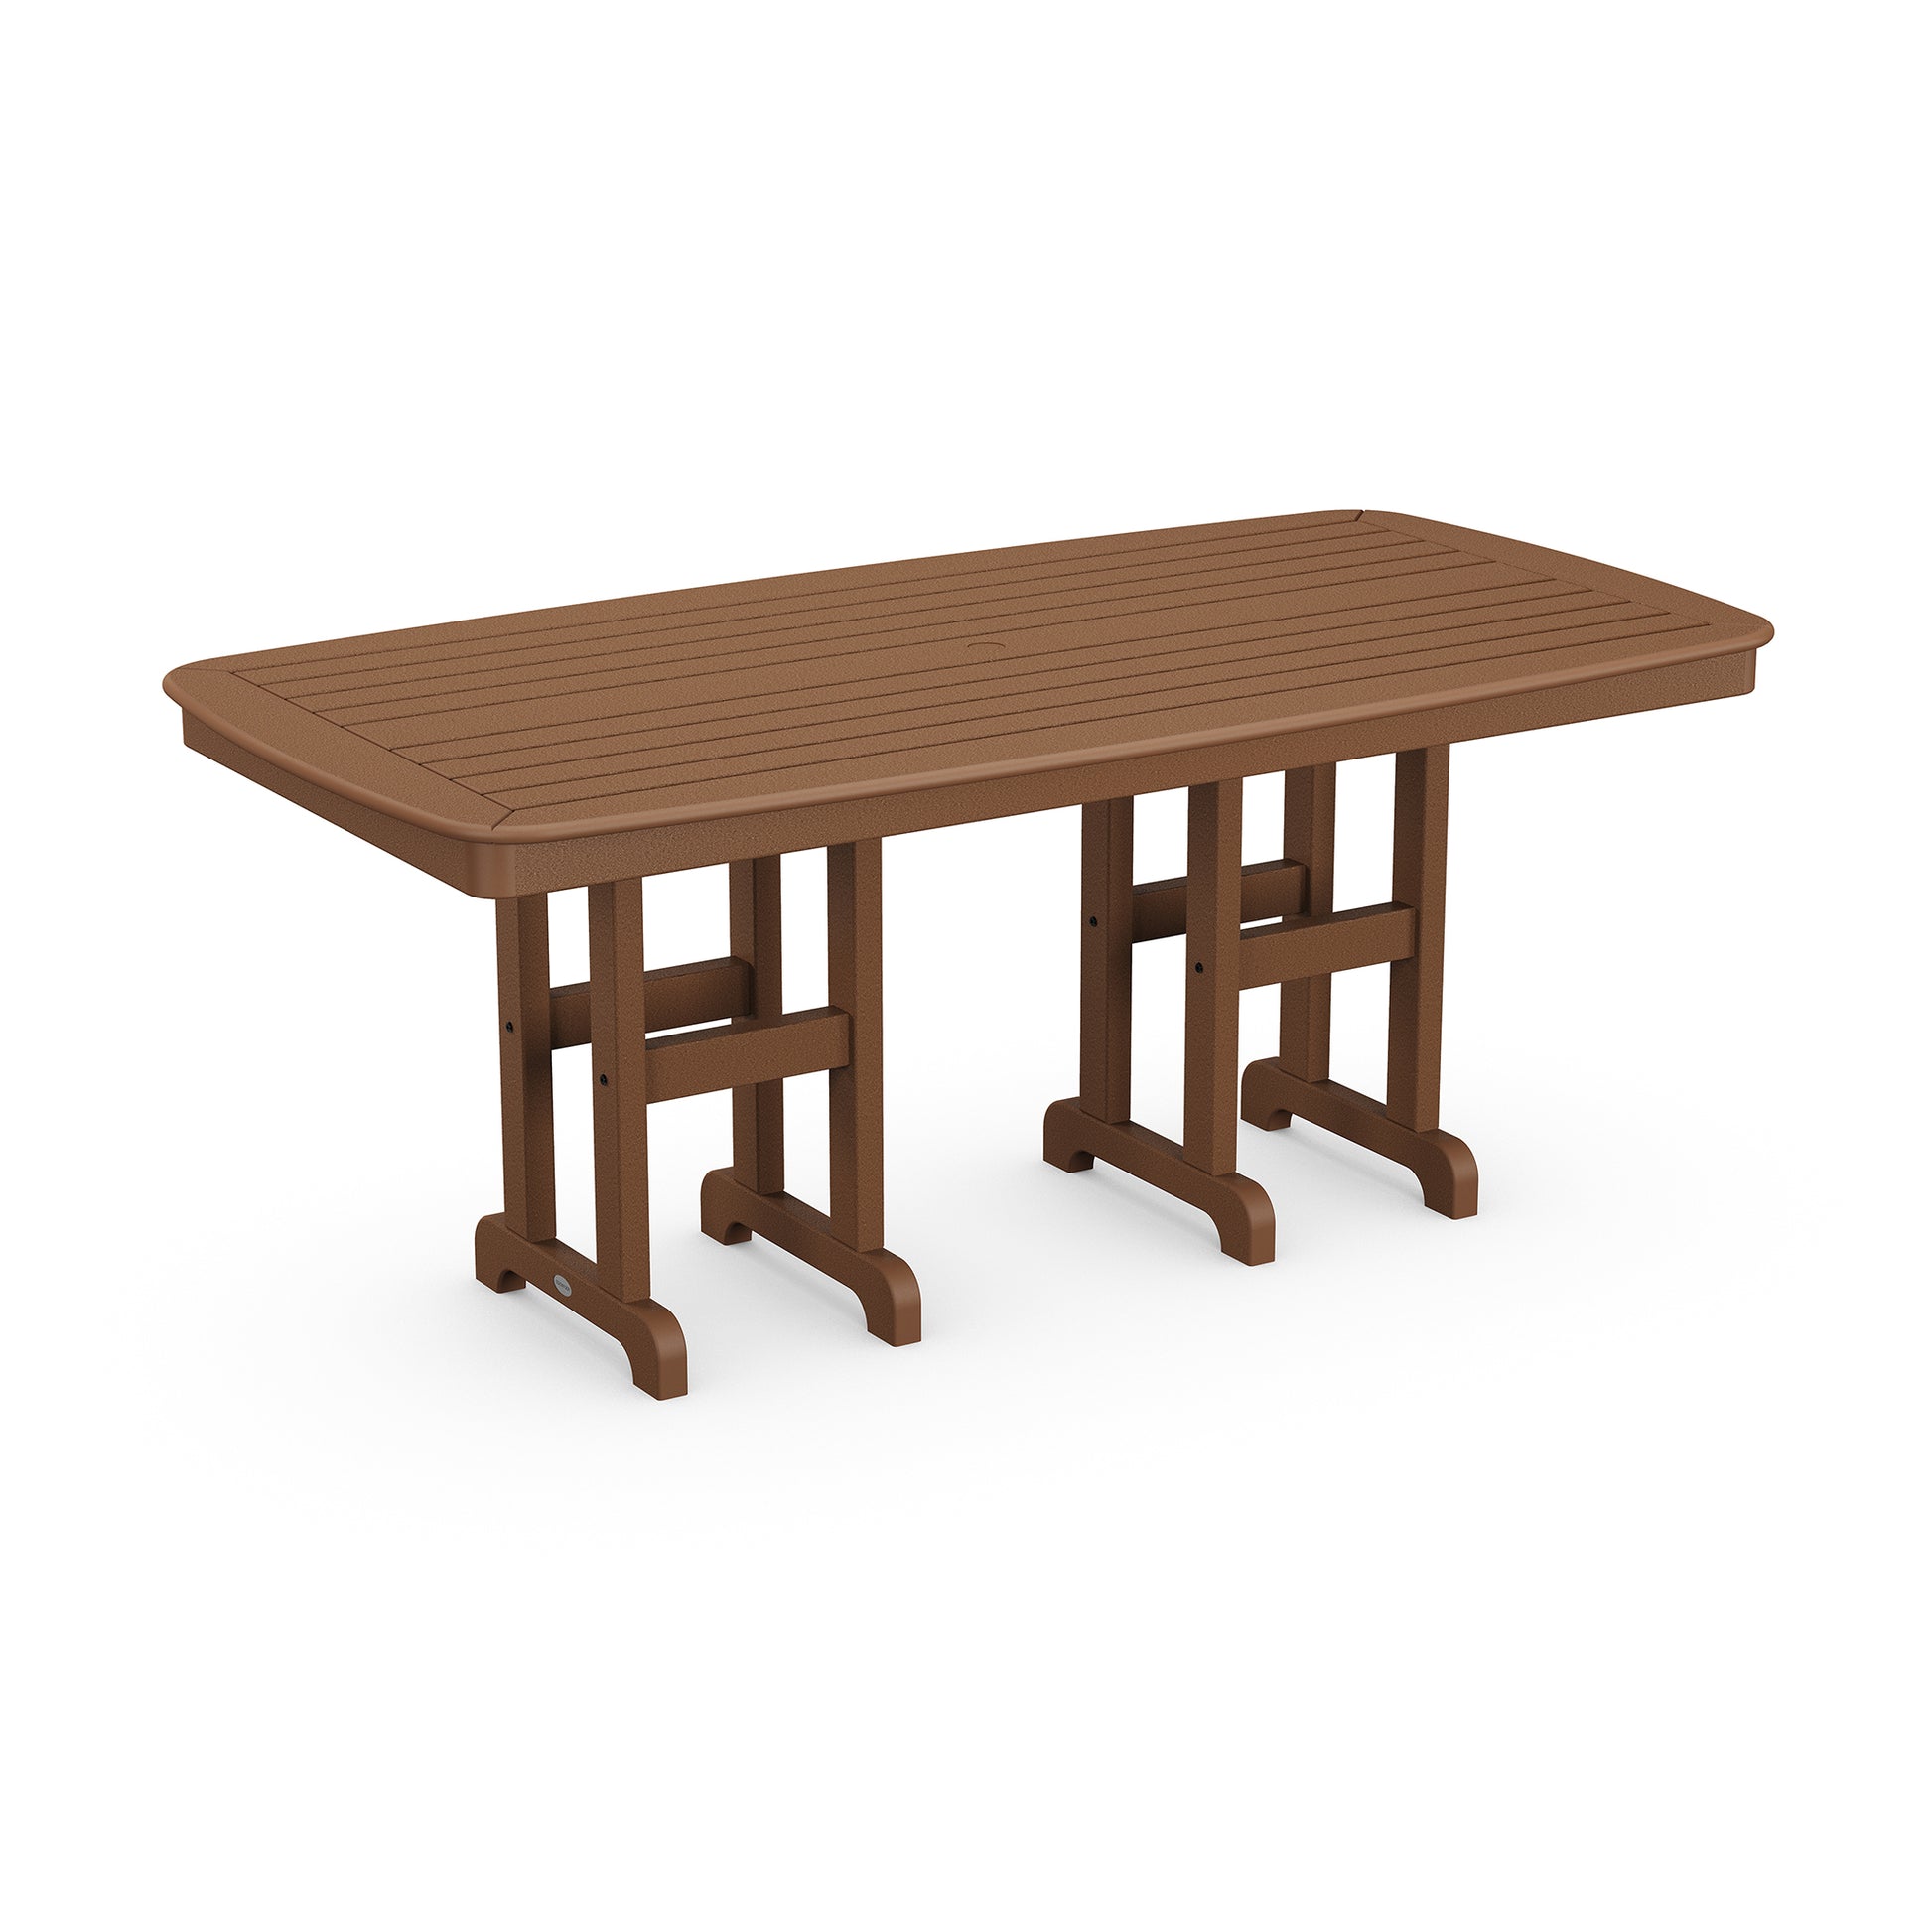 A 3D-rendered image of a brown POLYWOOD Nautical 37" x 72" rectangular dining table with attached benches on either side, placed on a plain white background.